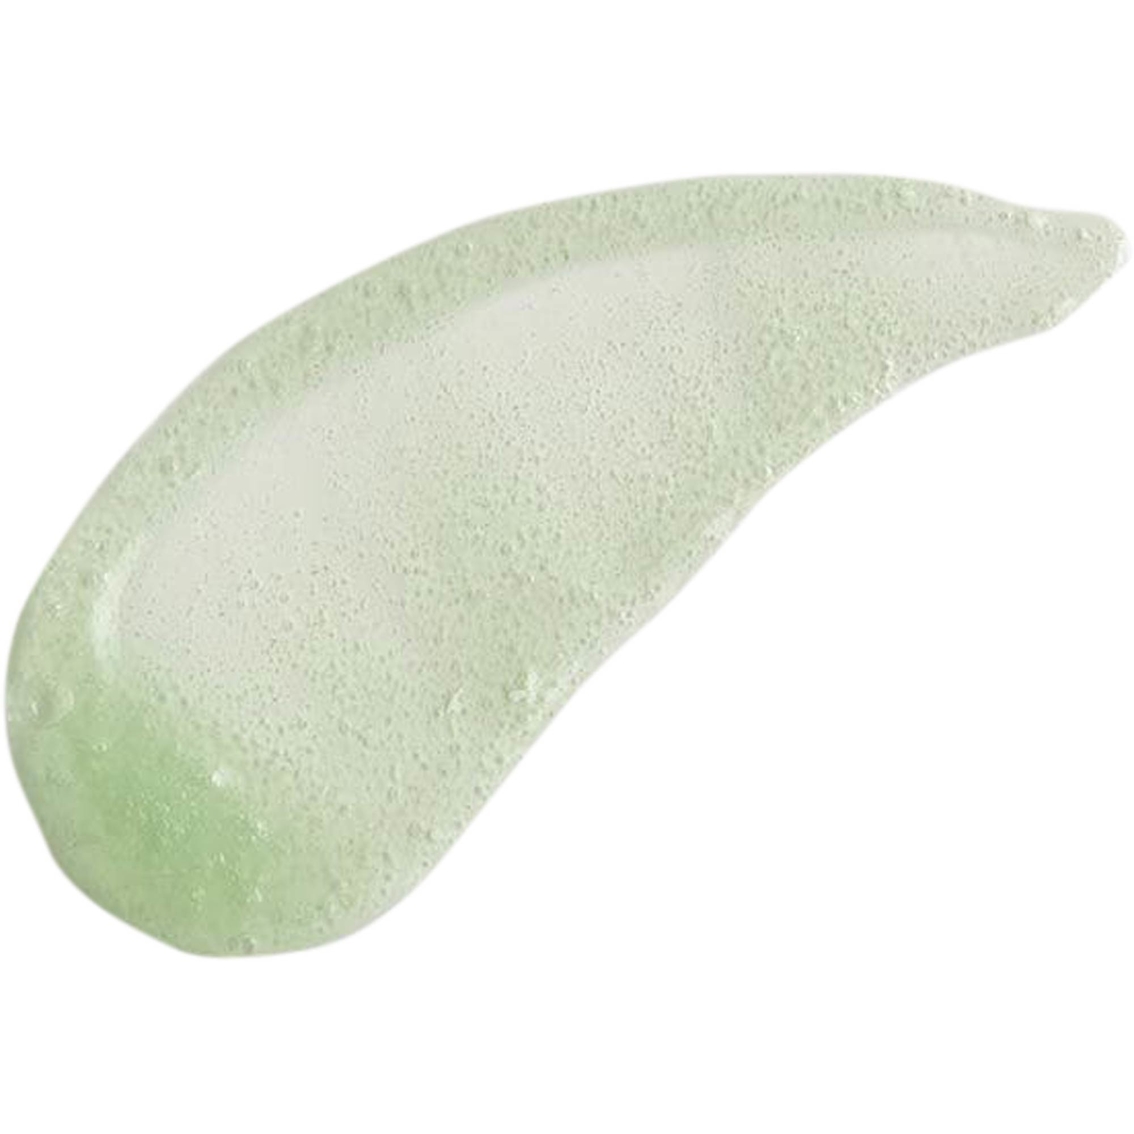 The Body Shop Tea Tree Squeaky-Clean Exfoliating Face Scrub - Image 2 of 2